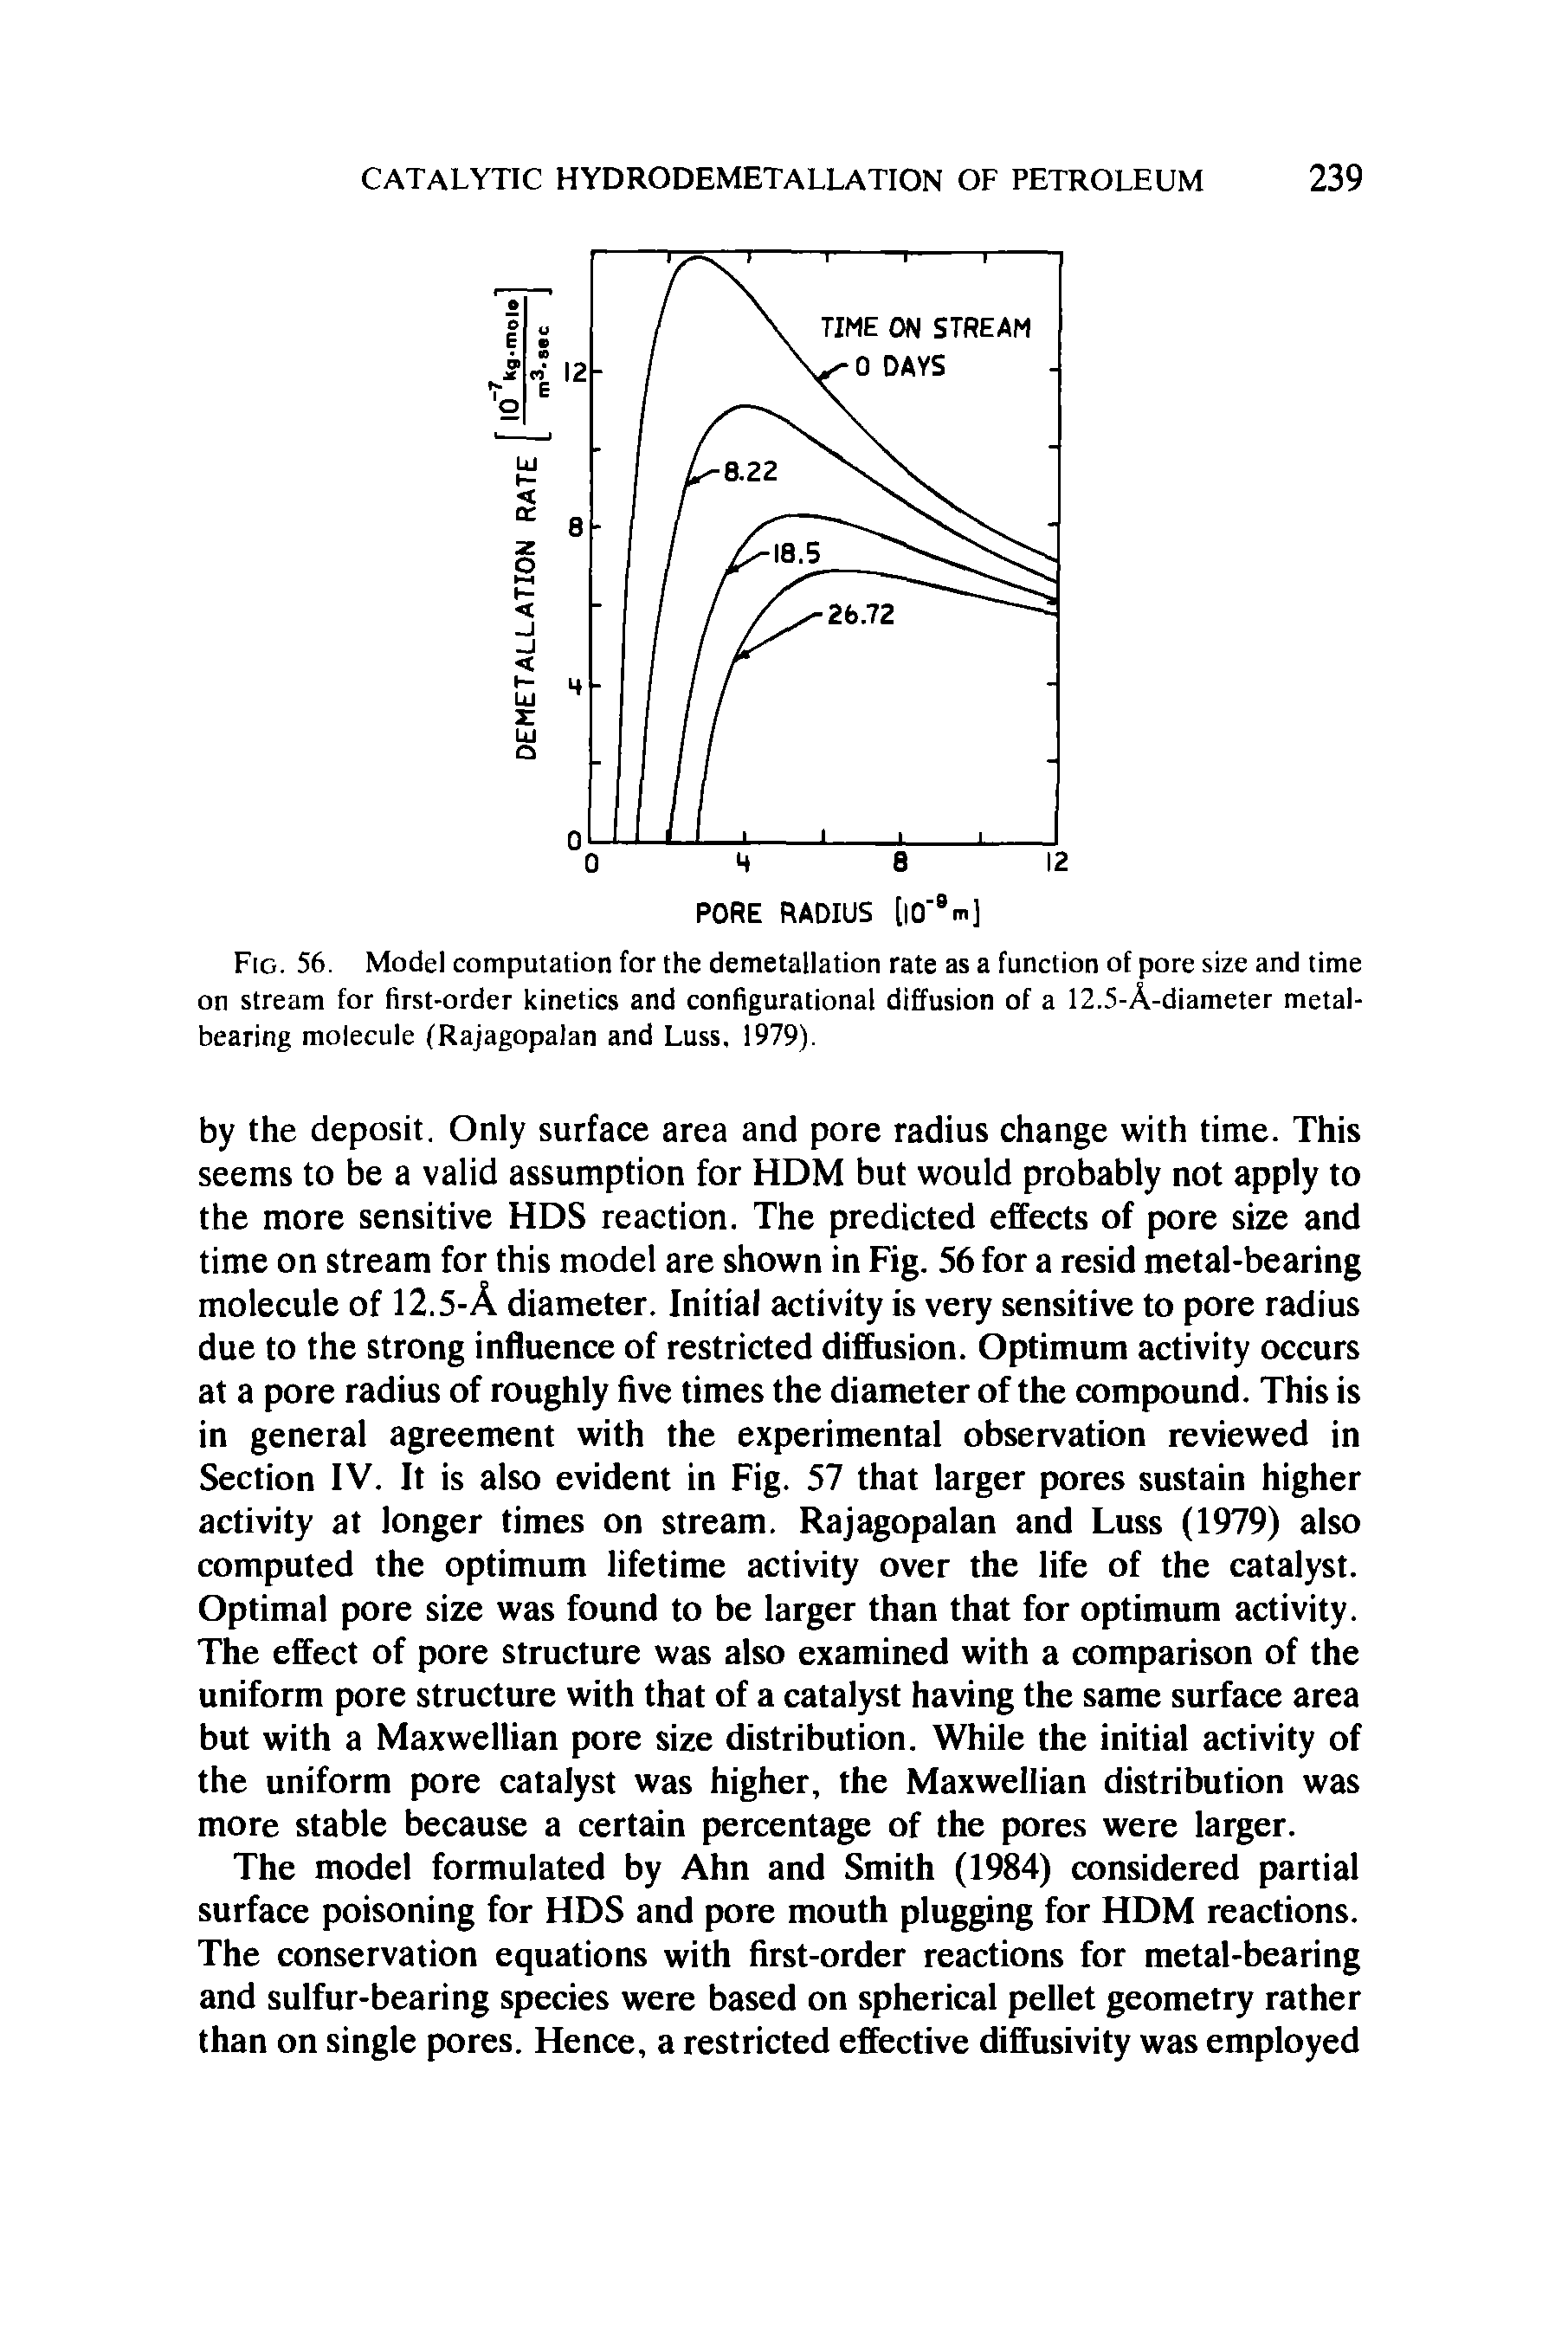 Fig. 56. Model computation for the demetallation rate as a function of pore size and time on stream for first-order kinetics and configurational diffusion of a 12.5-A-diameter metal-bearing molecule (Rajagopalan and Luss, 1979).